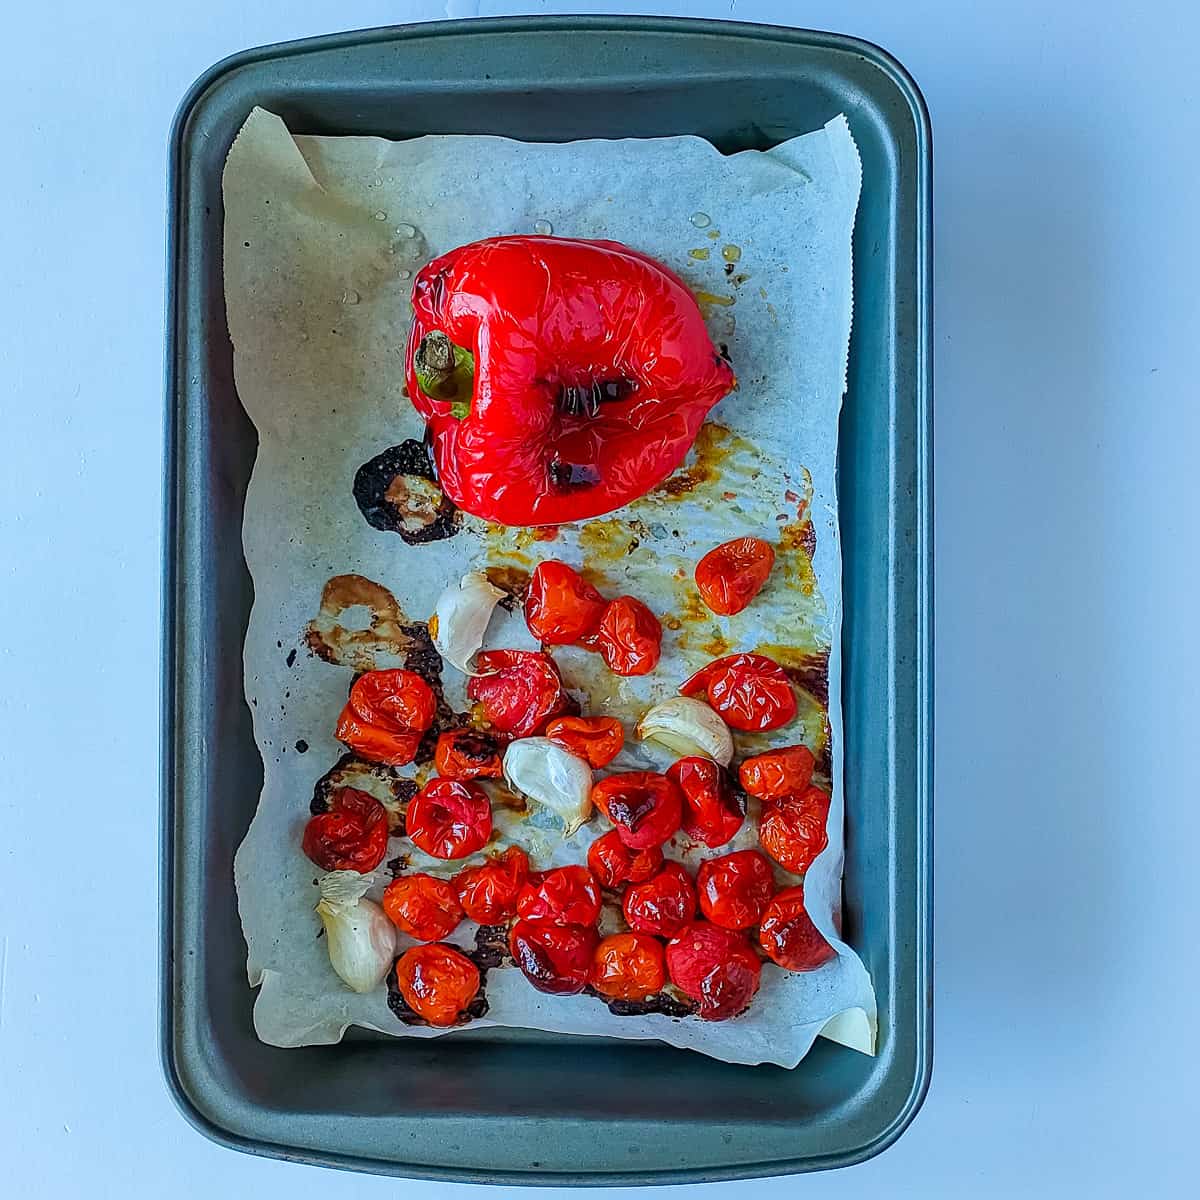 Roasted bell pepper, cherry tomatoes and garlic in a roasting pan.